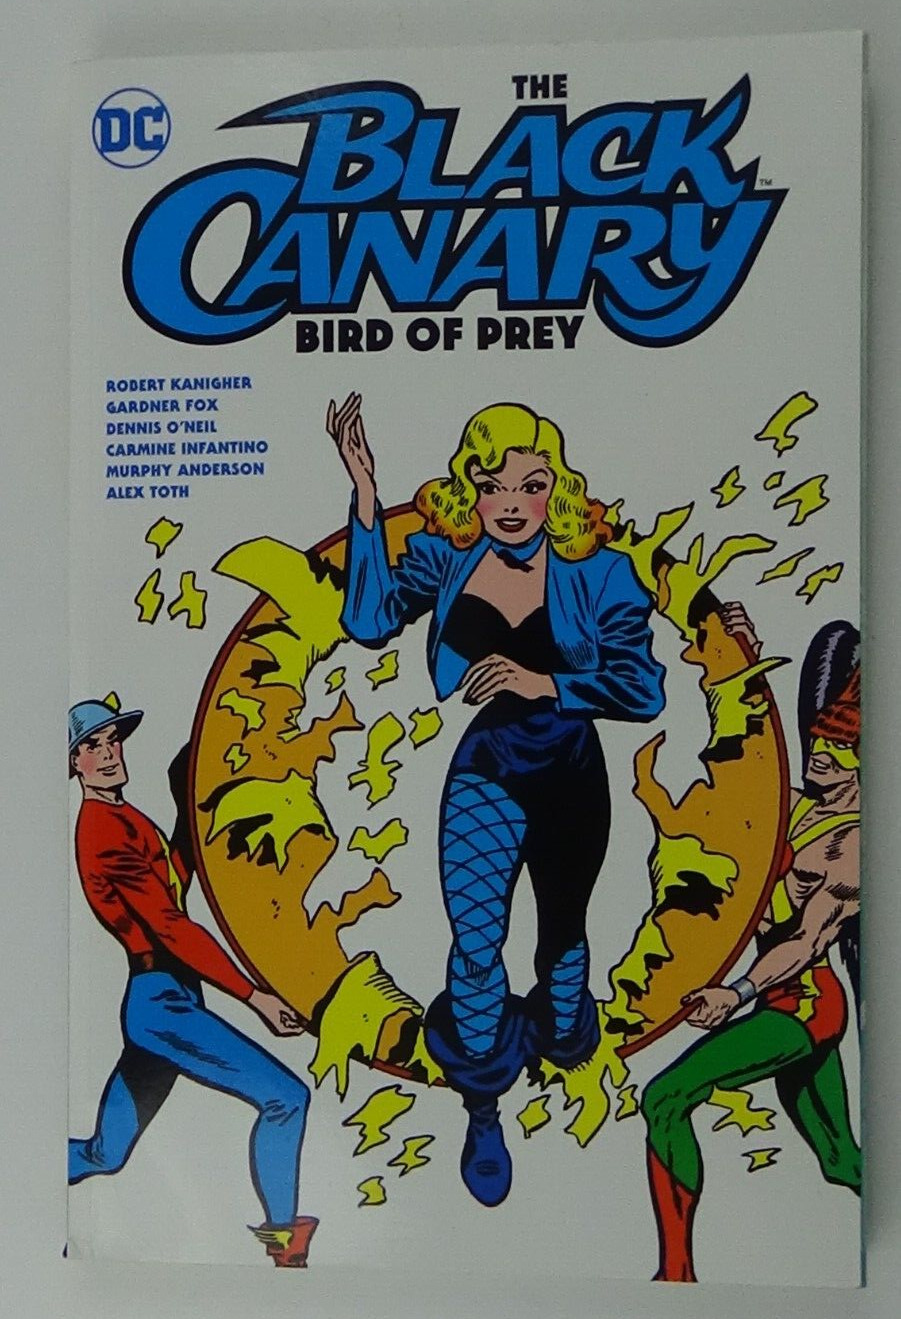 The Black Canary: Bird of Prey (DC Comics, May 2021) Paperback #011